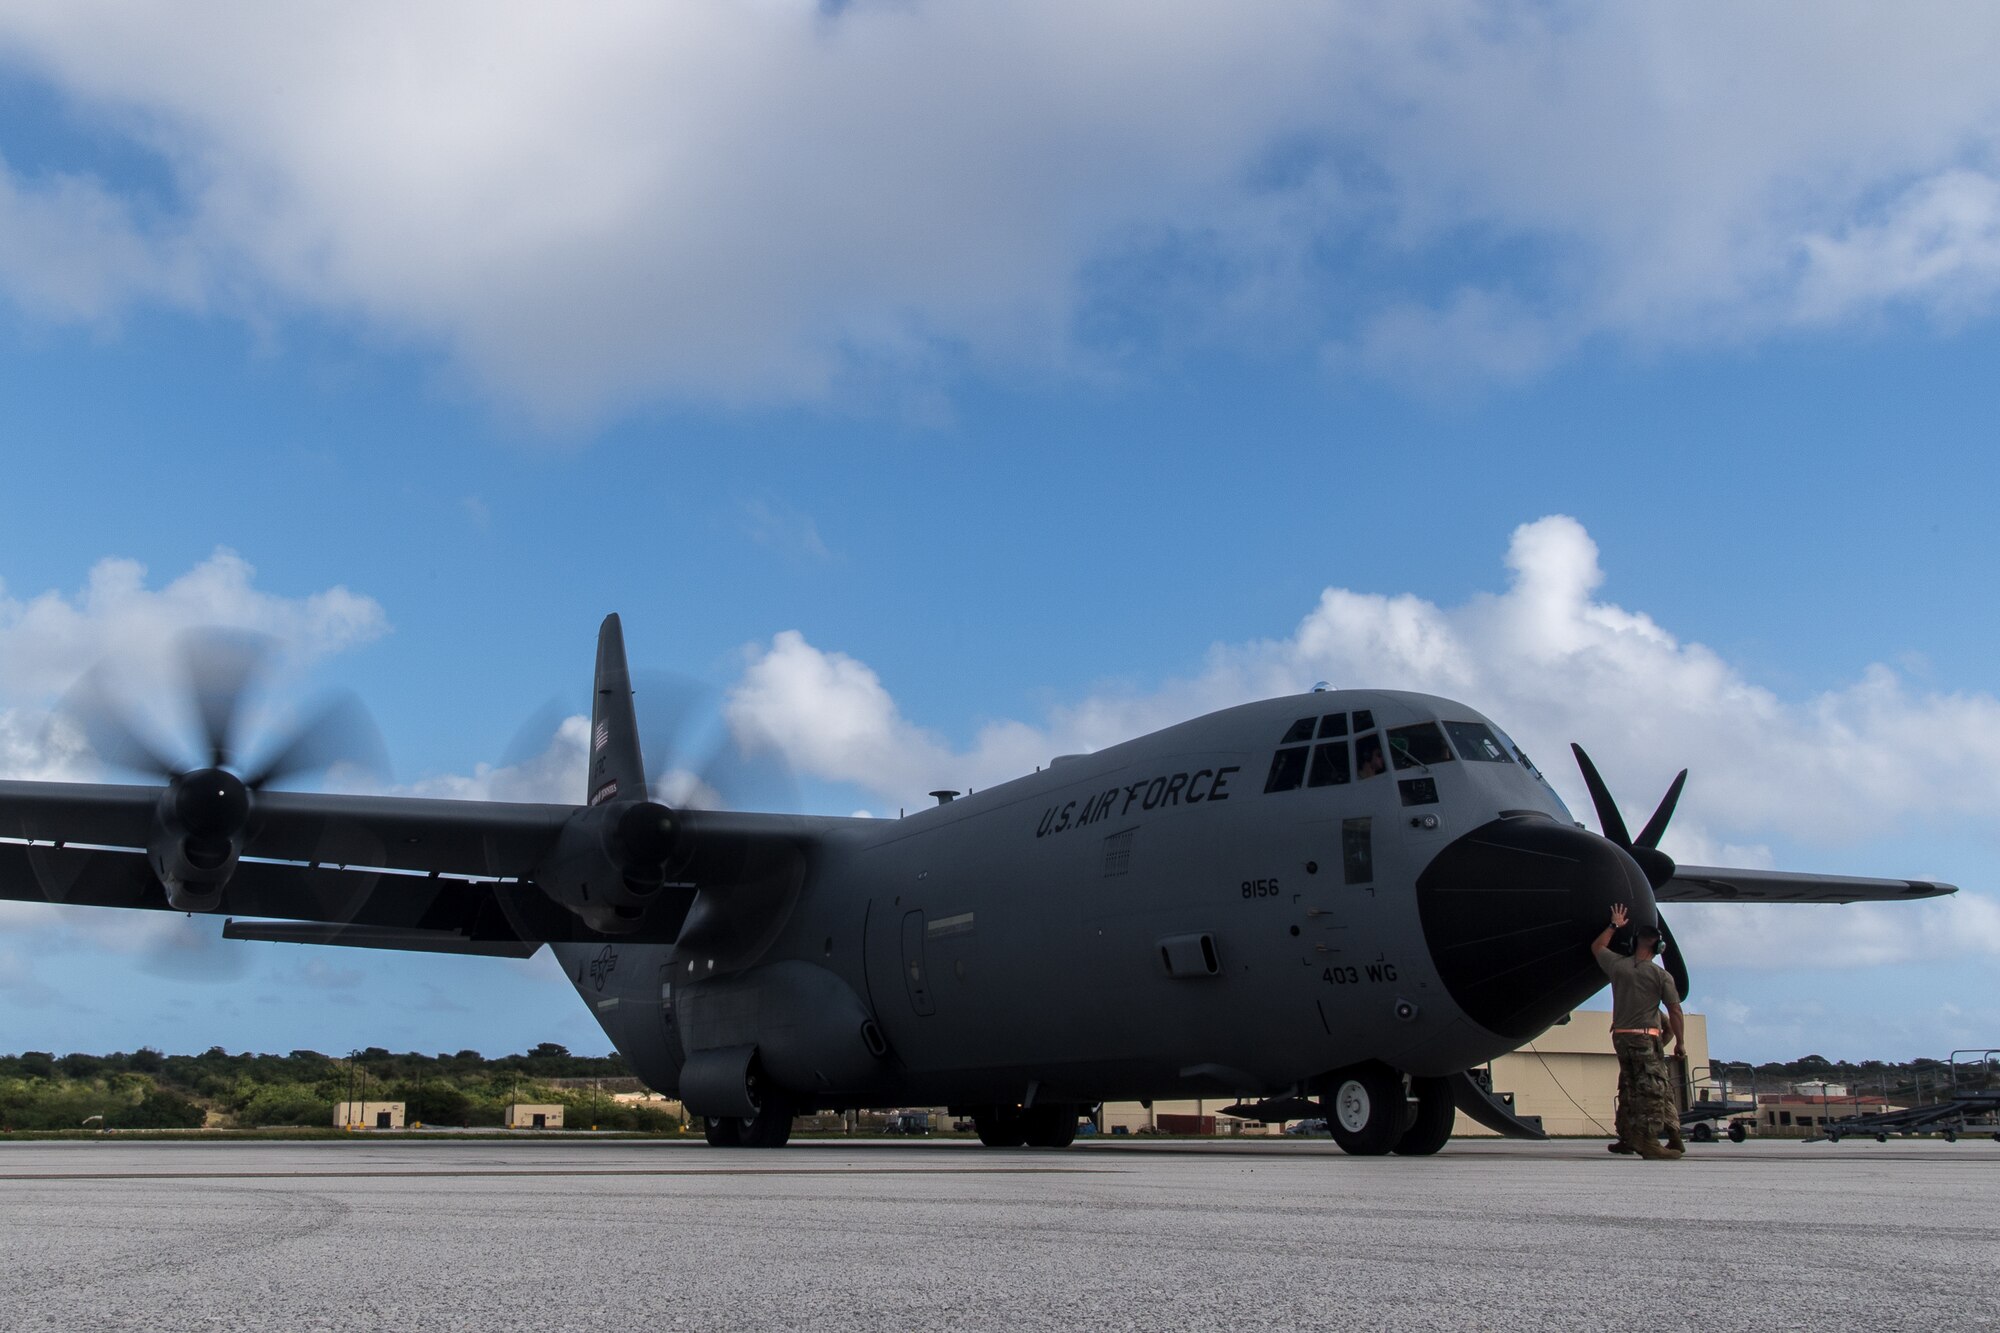 A Reserve Citizen Airman assigned to the 803rd Aircraft Maintenance Squadron, Keesler Air Force Base, Mississippi, preparse a C-130J Super Hercules for take-off during Exercise Cope North 20, Feb. 24, 2020, Andersen Air Force Base, Guam. Cope North 20 is an annual trilateral field training exercise conducted at Andersen Air Force Base, Guam, and around the Commonwealth of the Northern Mariana Islands (CNMI), Palau and Yap in the Federated States of Micronesia. (U.S. Air Force photo by Senior Airman Gracie Lee)